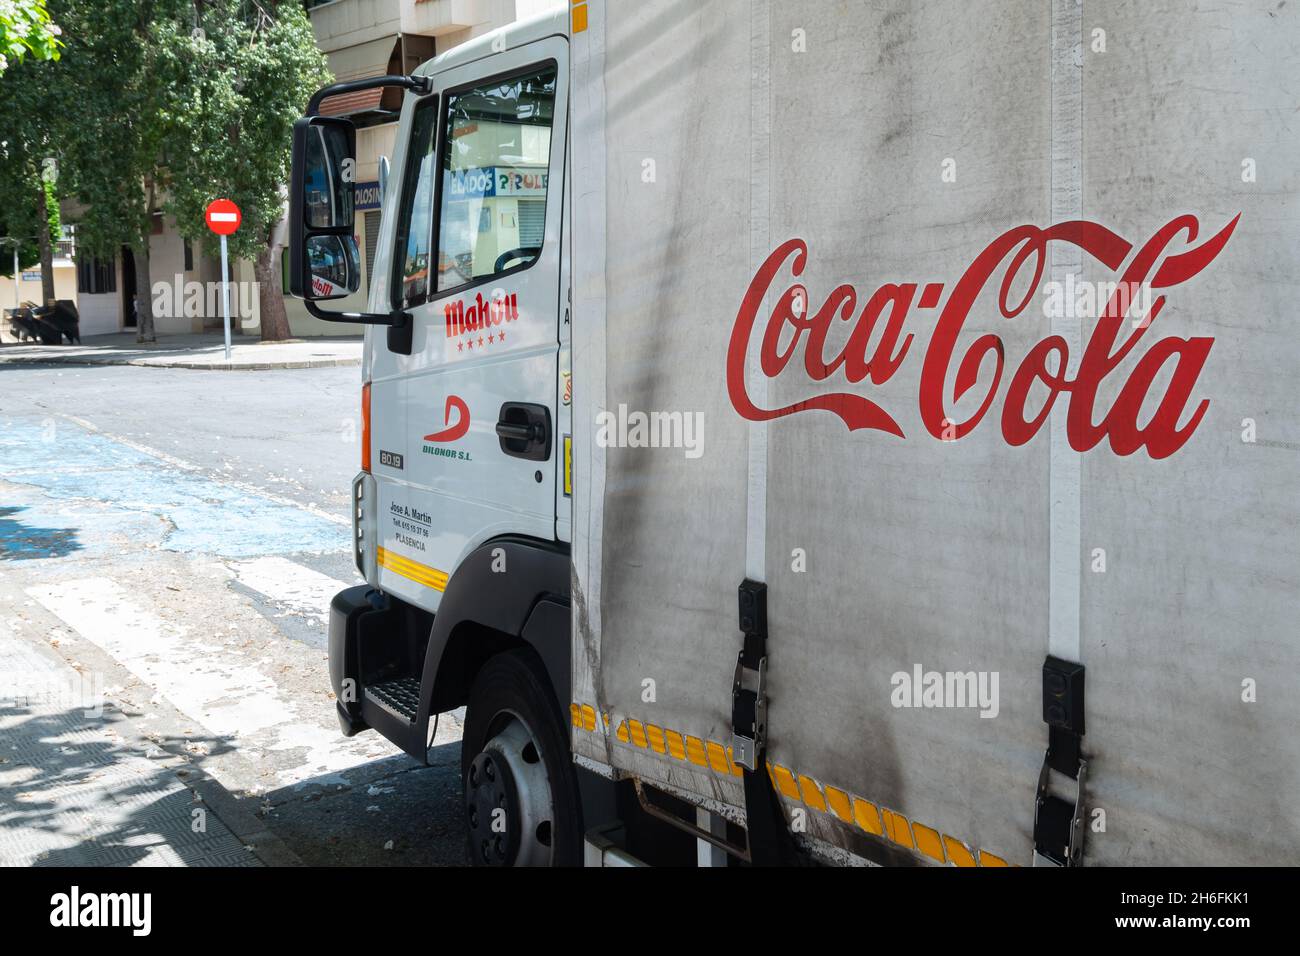 PLASENCIA, SPAIN - May 11, 2021: Plasencia, Spain - May 11, 2021: White Coca Cola soft drink truck Coke brand logistic deliver soft drinks and product Stock Photo